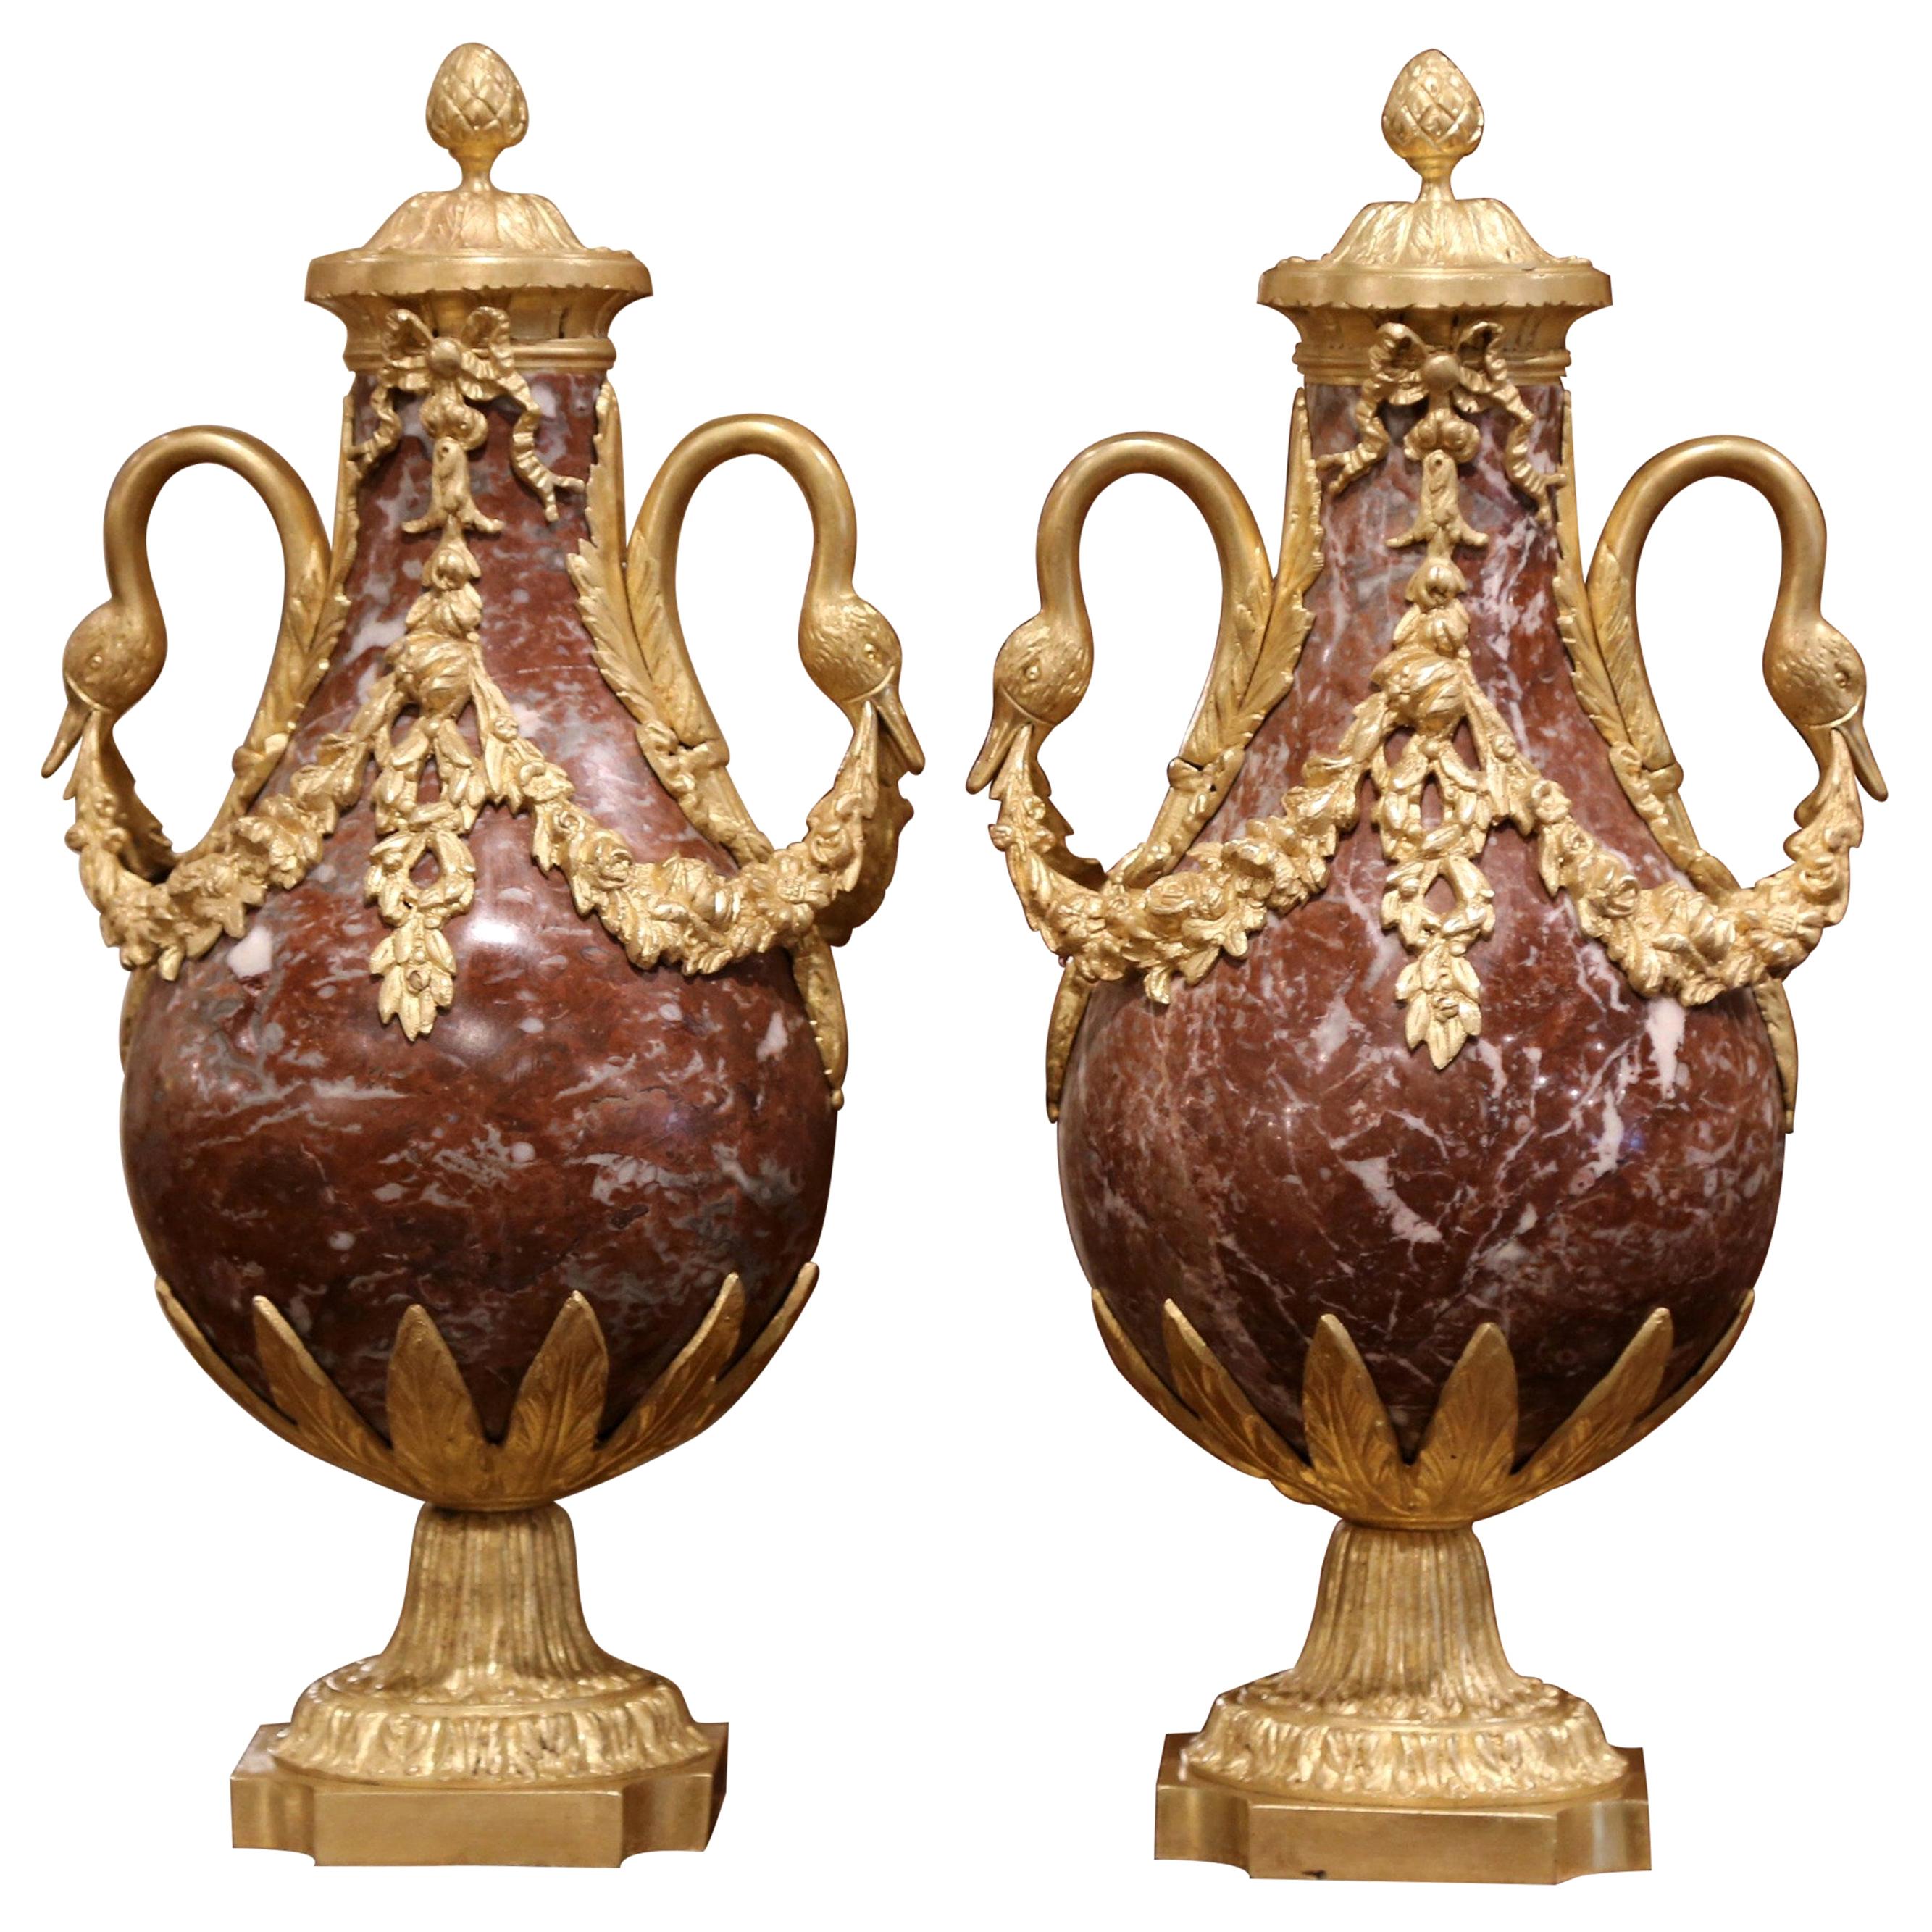 Pair of 19th Century French Carved Variegated Marble and Gilt Bronze Cassolettes